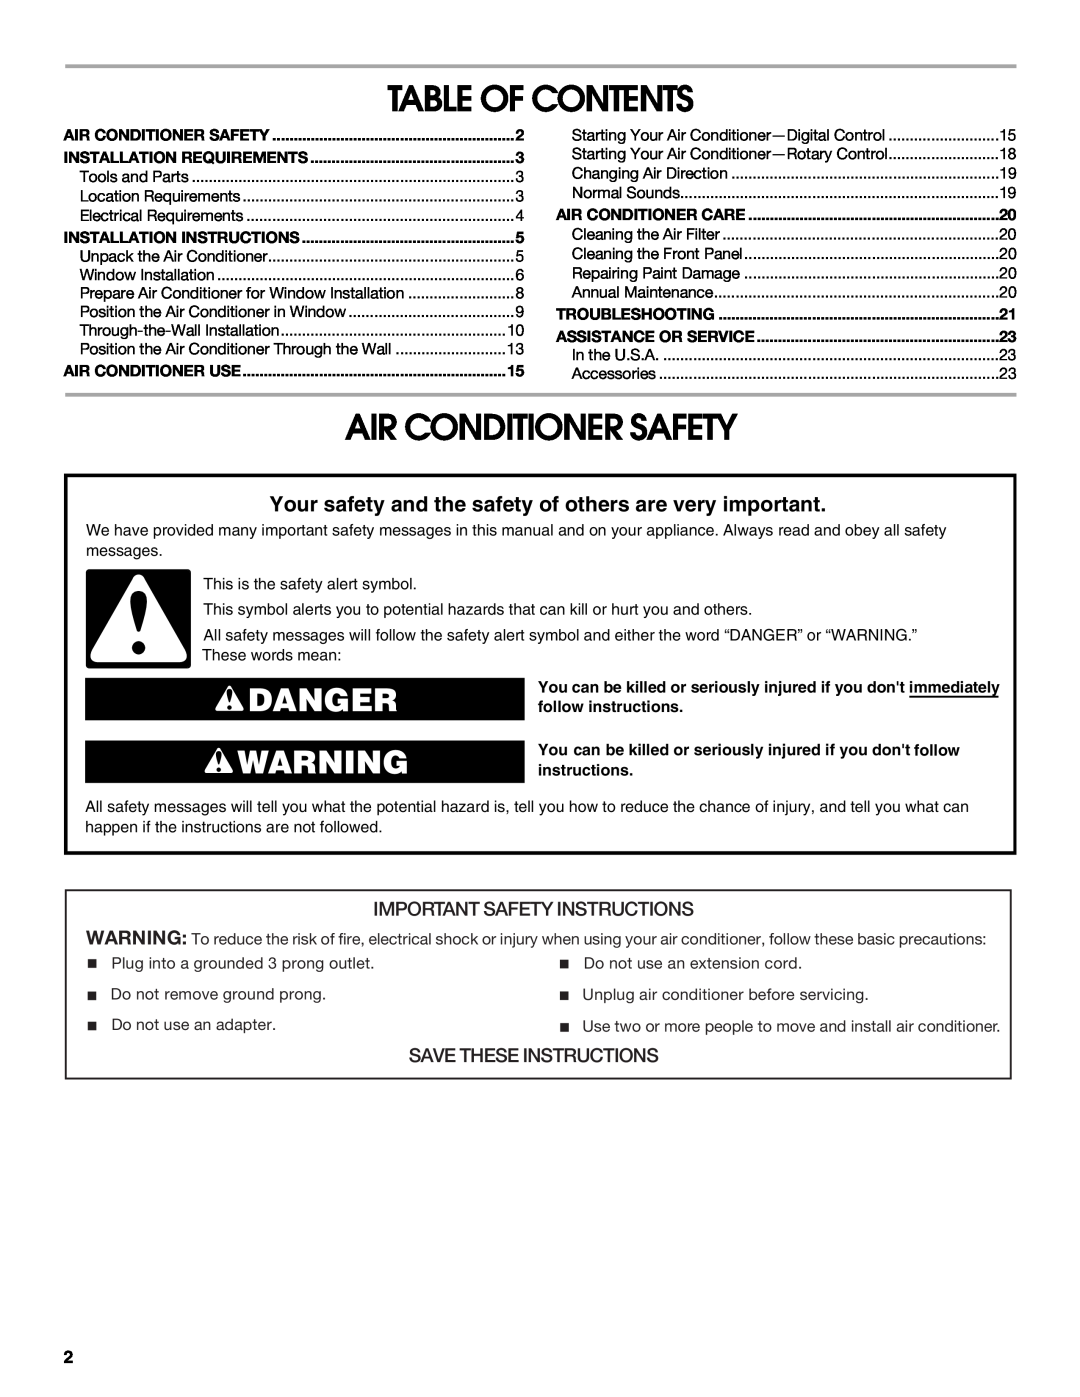 Whirlpool CA15WYR0 manual Table Of Contents, Air Conditioner Safety, Danger, Important Safety Instructions 